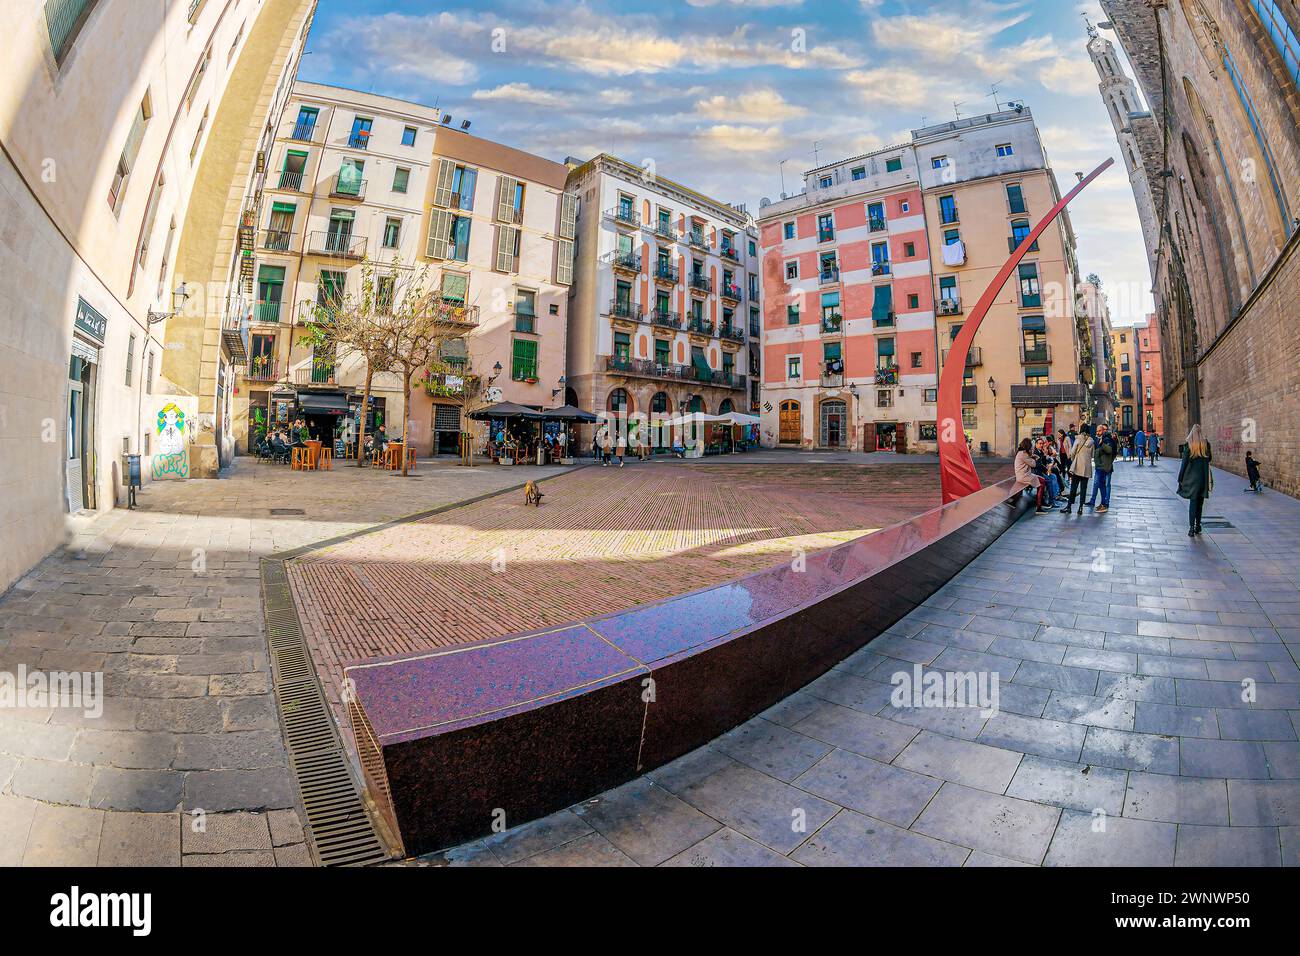 BARCELONA, SPAIN - FEB. 27, 2022: Plaza Fossar de les Moreres, a memorial square with a monument, a flame and the engraved poem by Frederic Soler, in Stock Photo